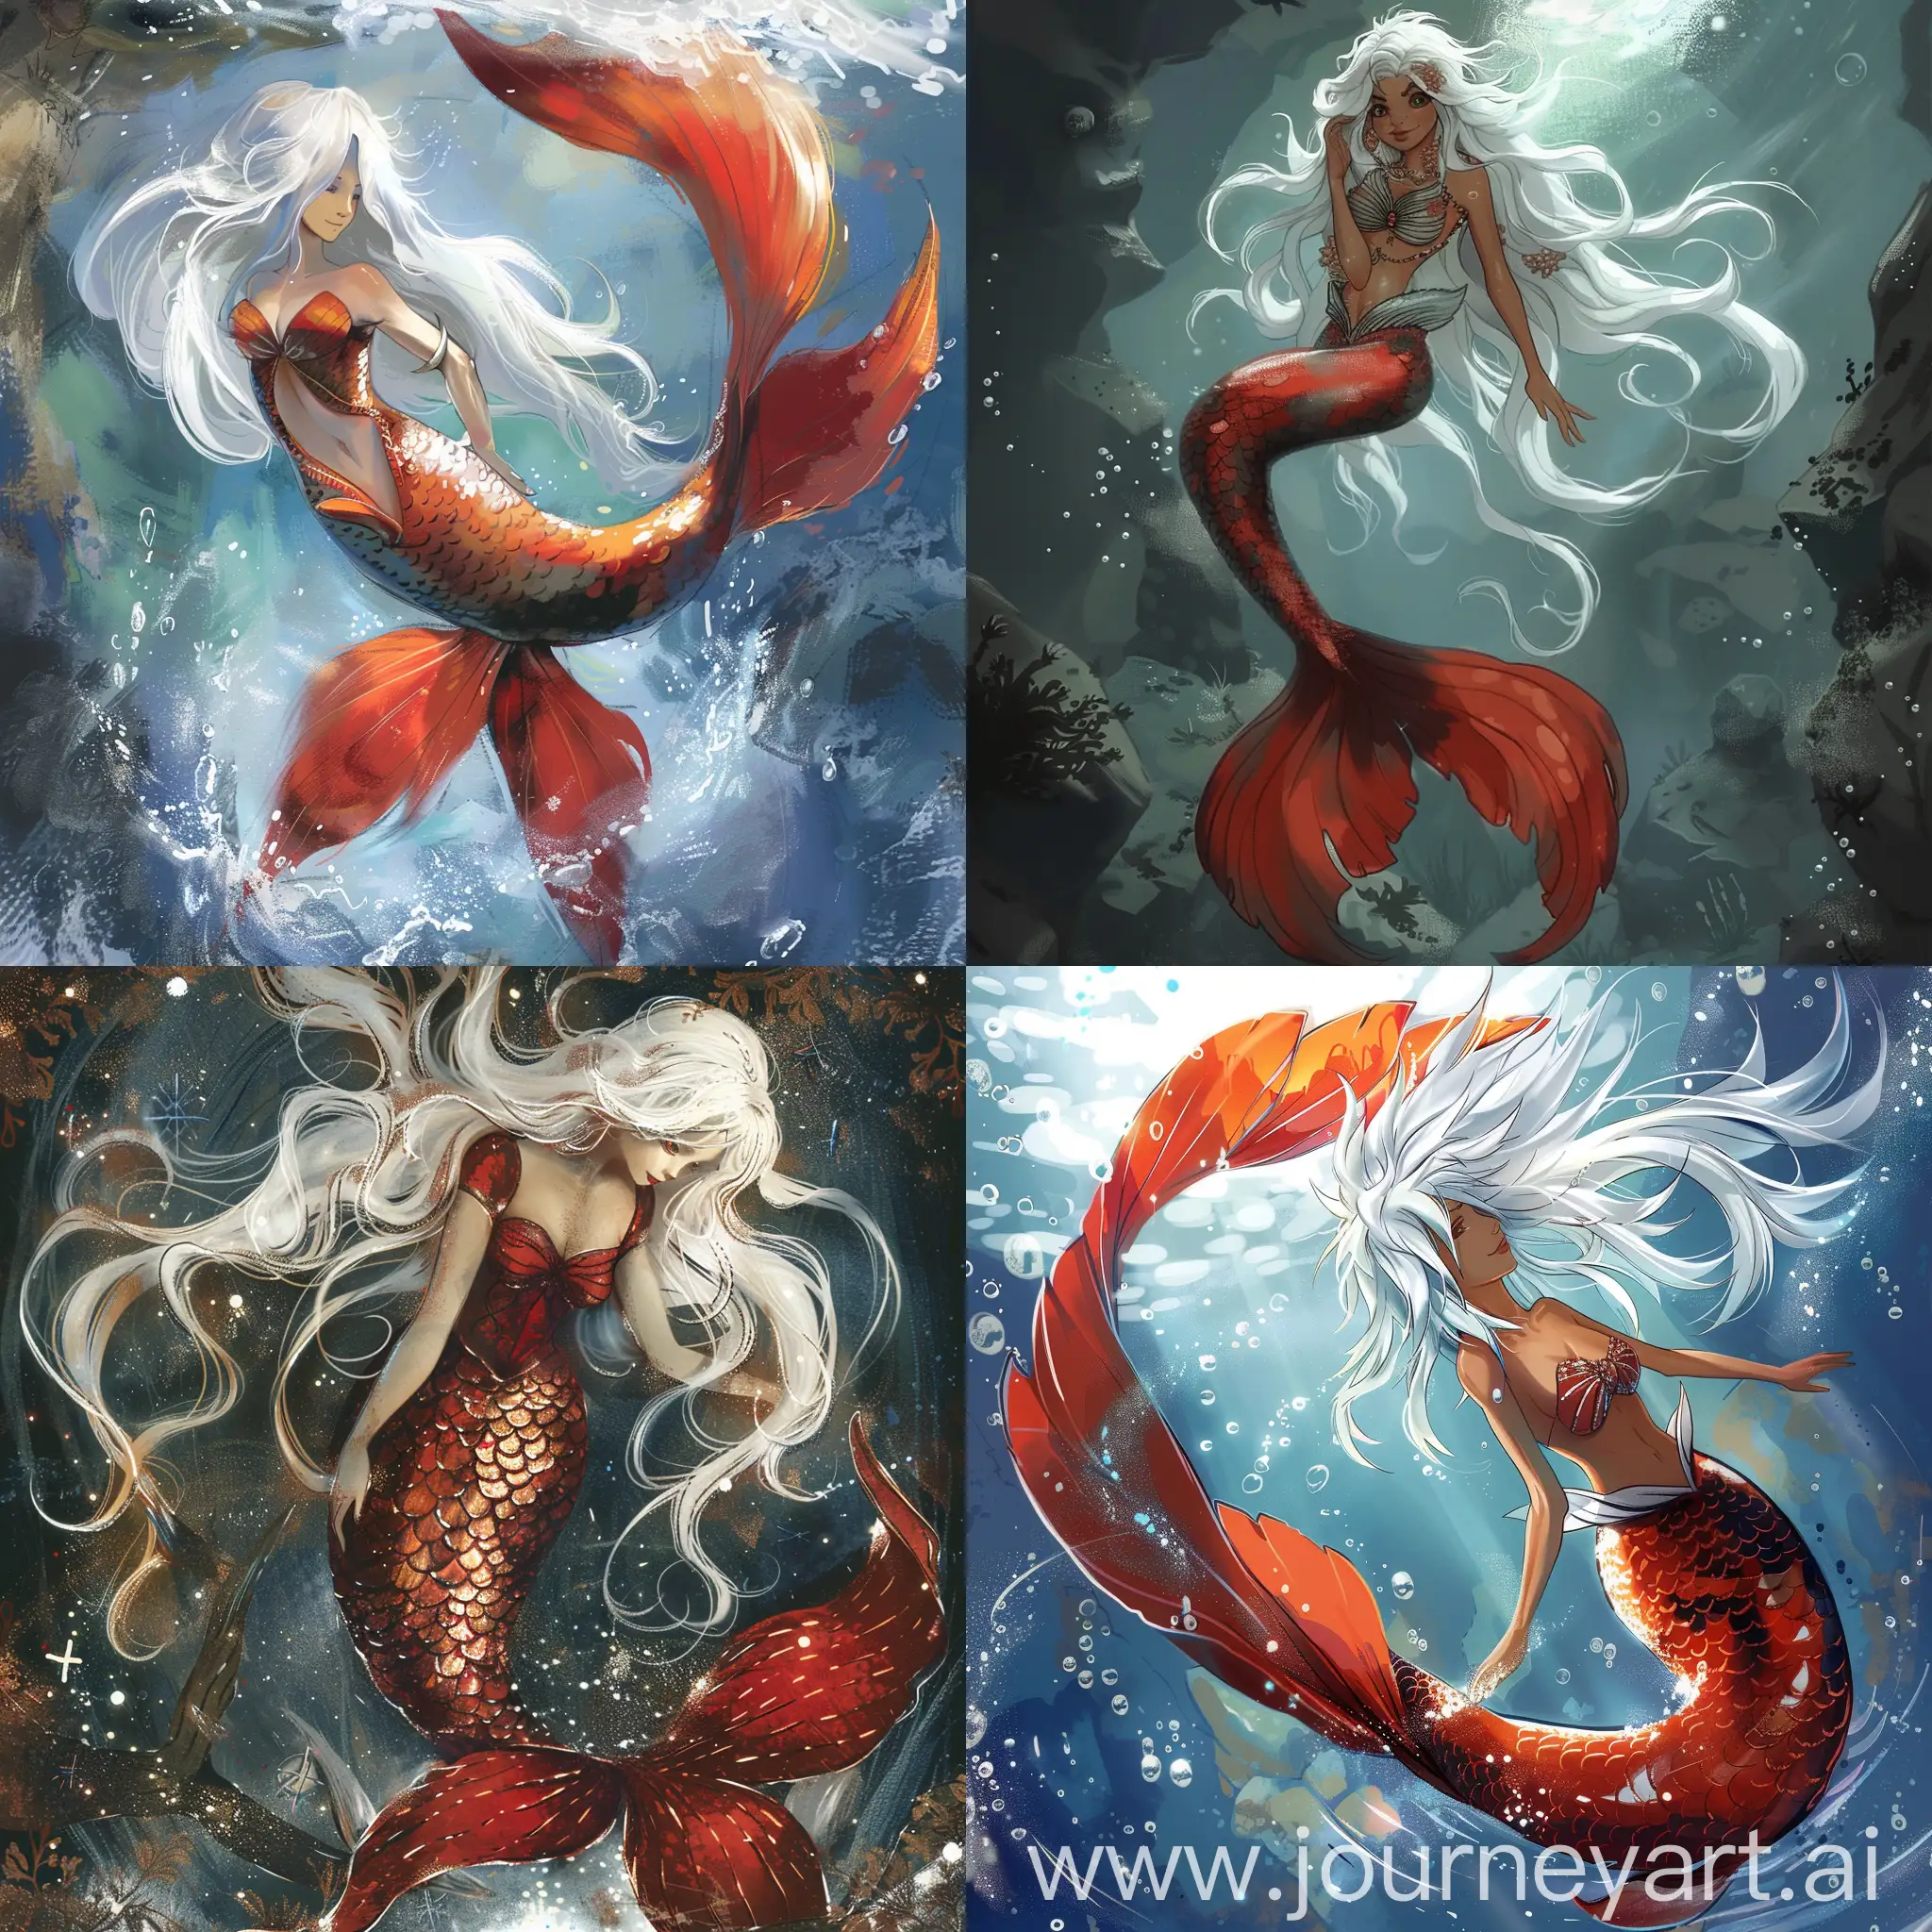 Enchanting-Mermaid-with-White-Hair-and-a-Big-Red-Tail